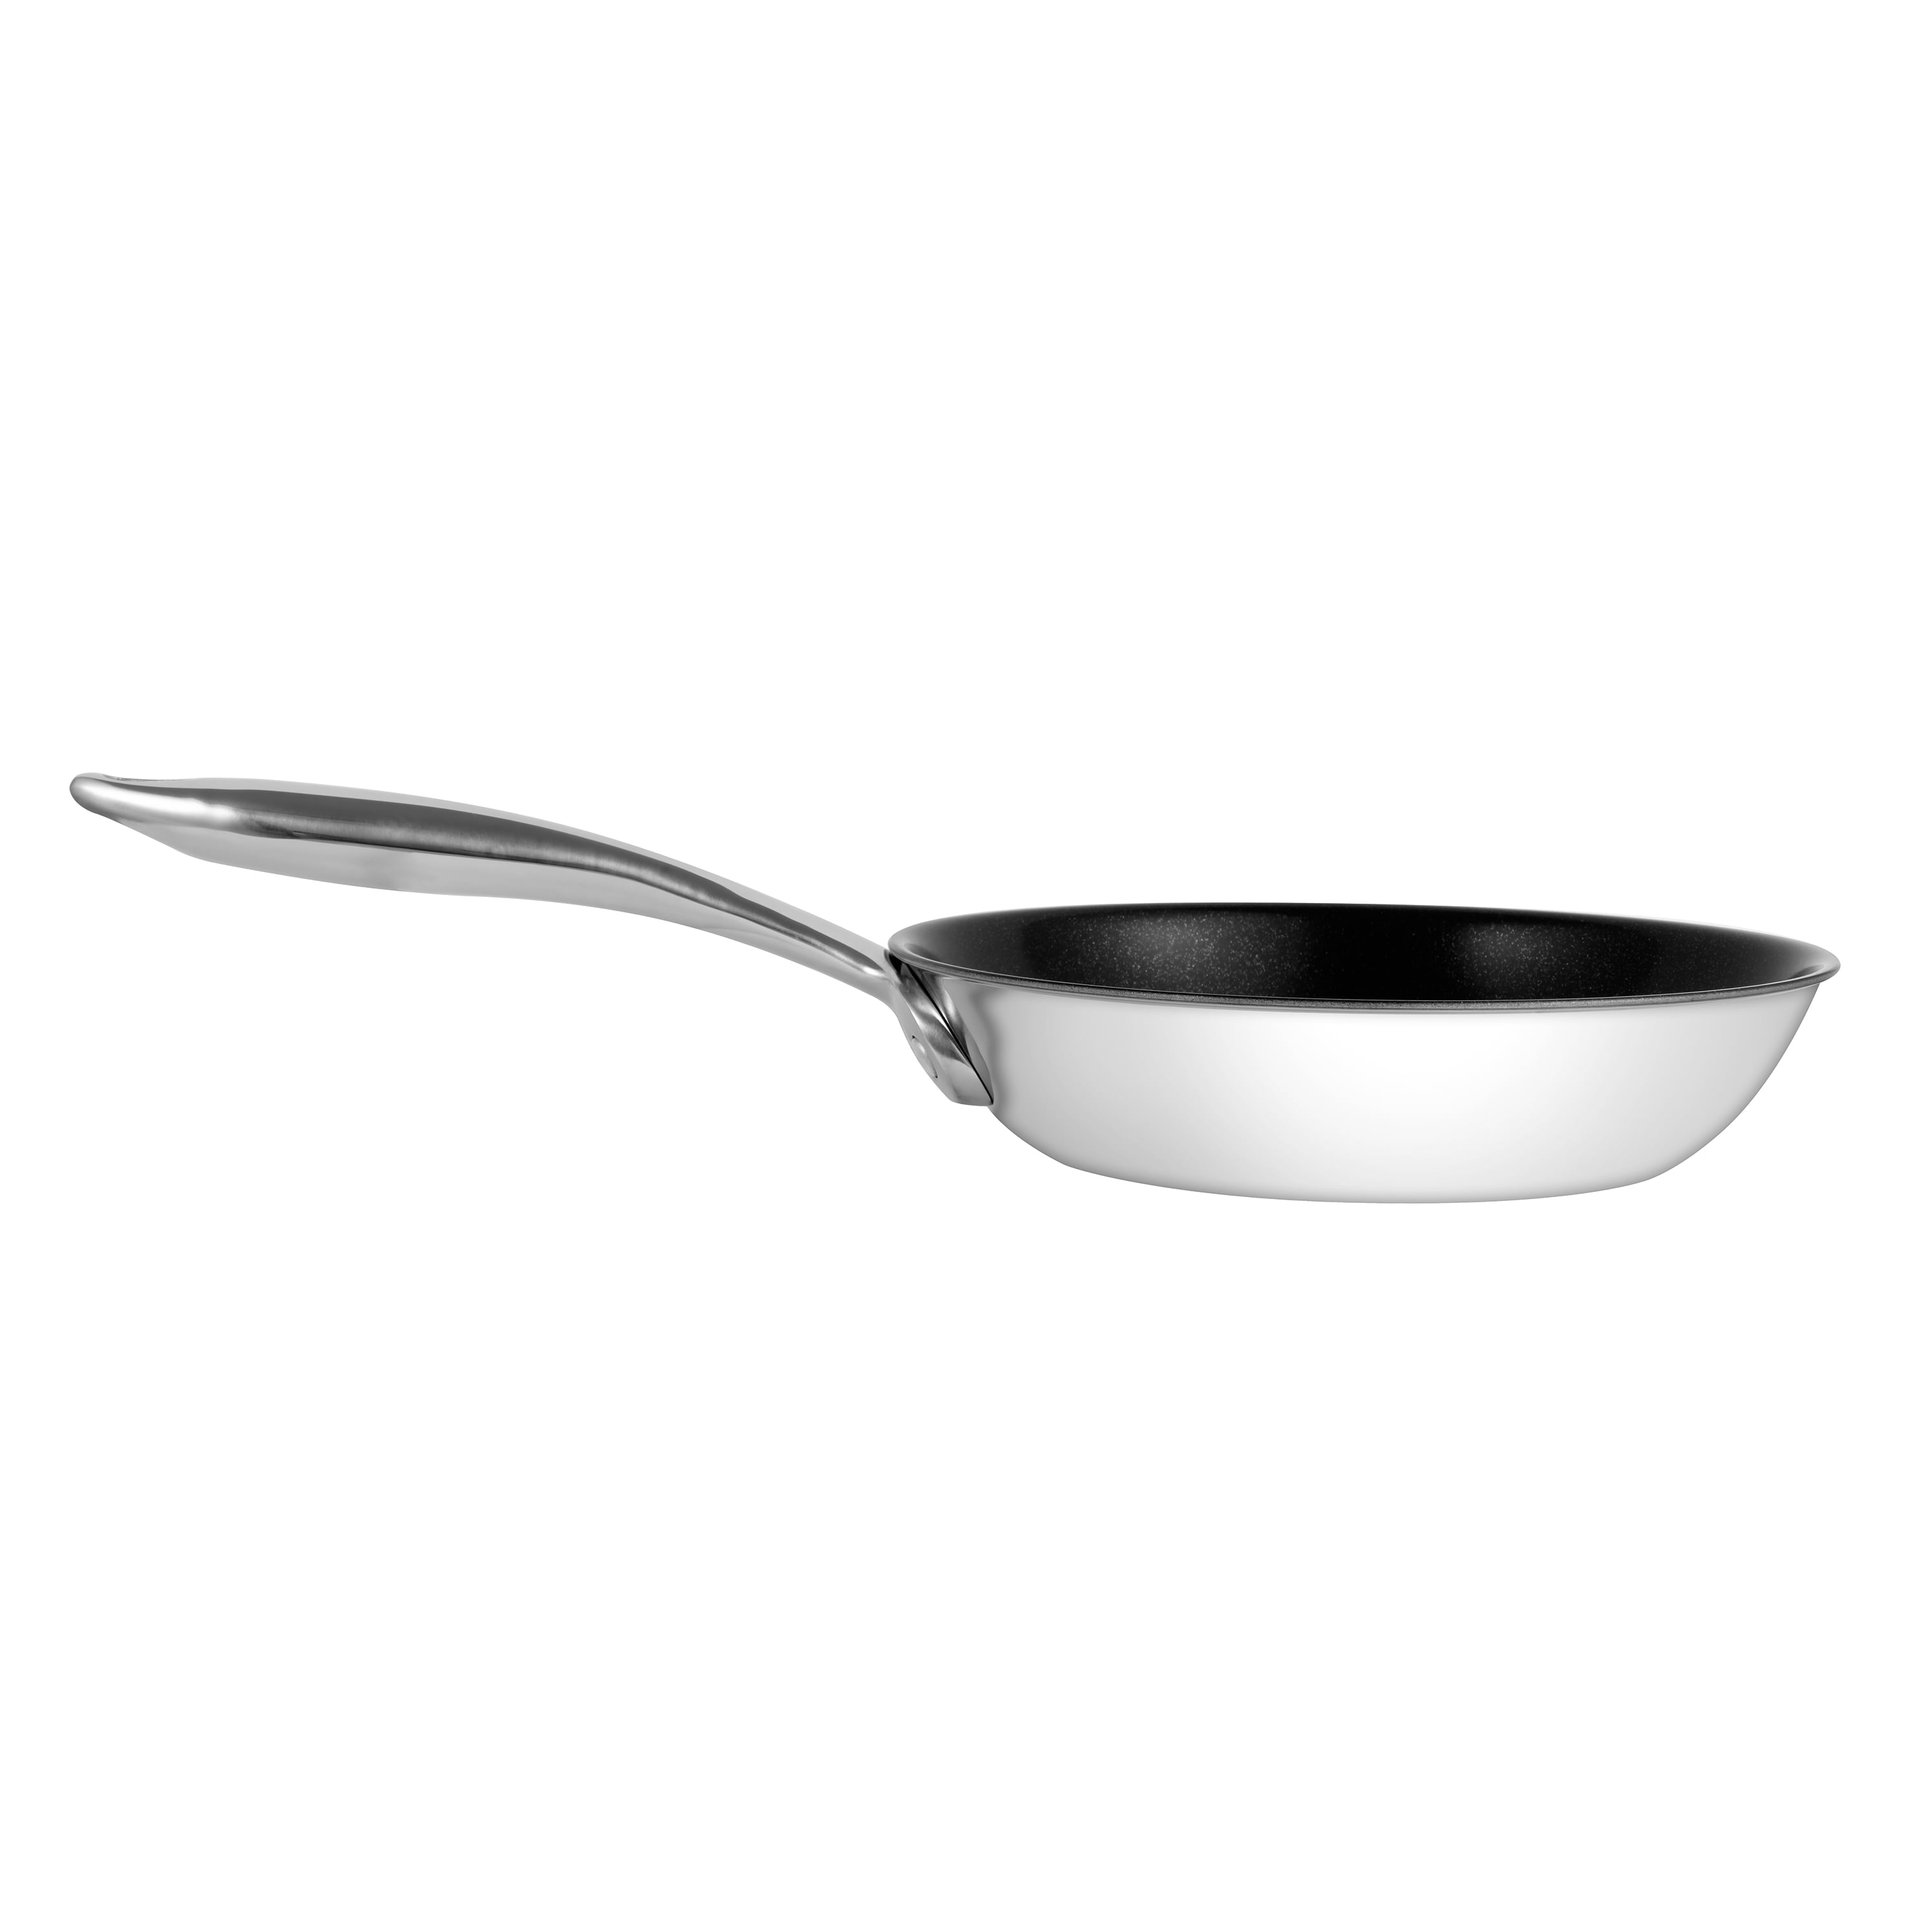 The Stainless Steel All-In-One Sauce Pan by Ozeri, with a 100% PFOA and  APEO-Free Non-Stick Coating developed in the USA